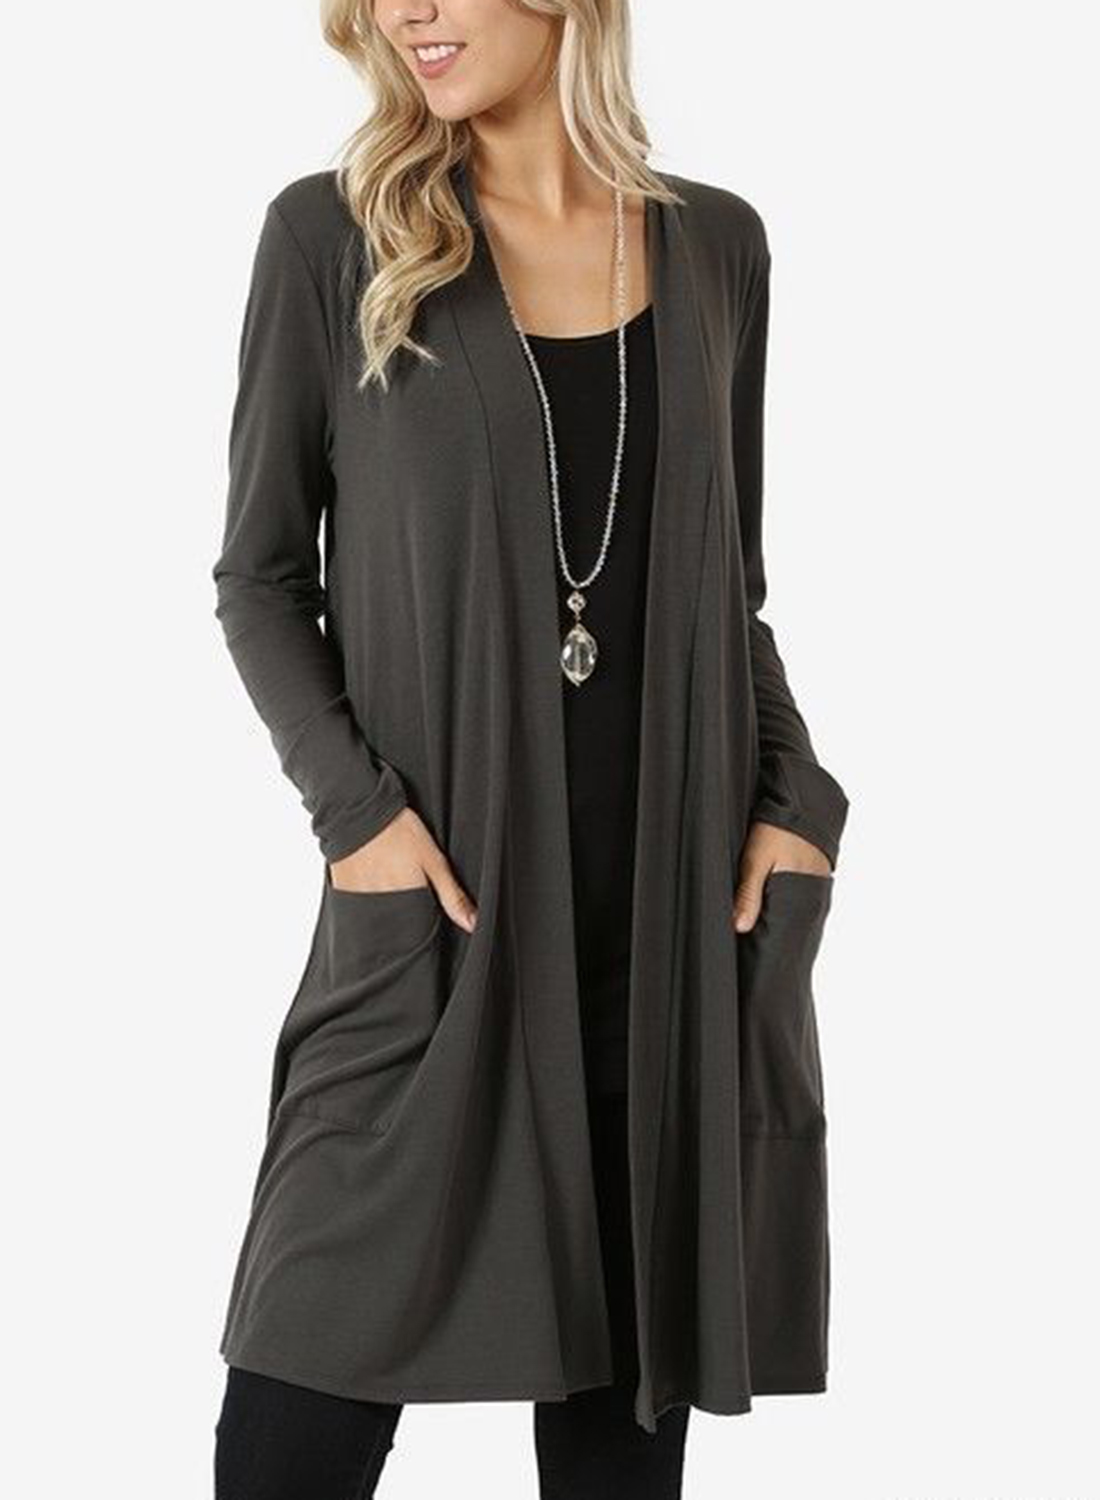 Grey Casual Long Sleeve Open Front Cardigan With Pockets - STYLESIMO.com